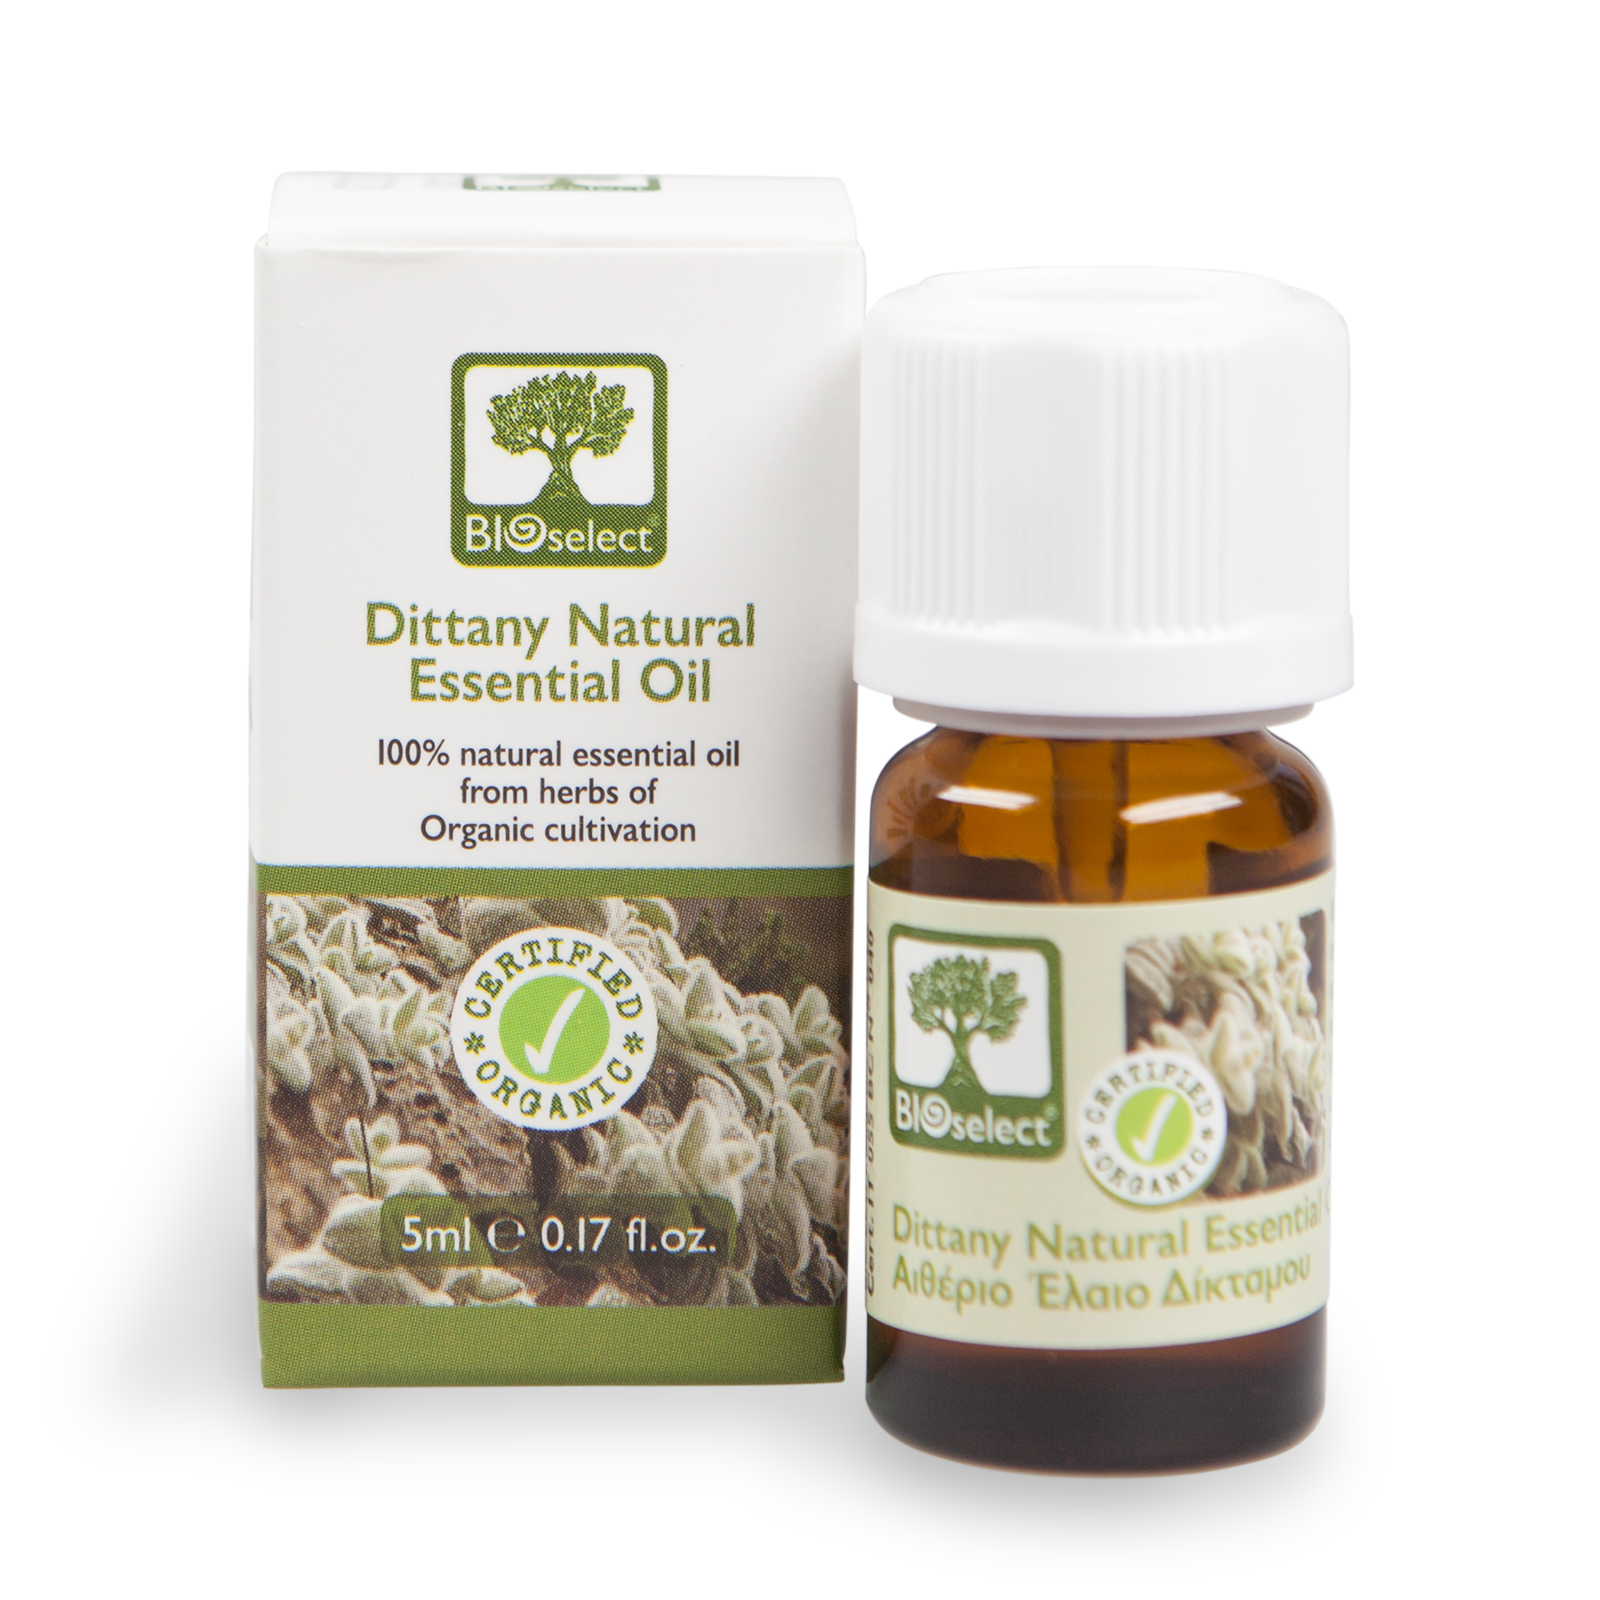 Bioselect Dittany Natural Essential Oil Certified Organic